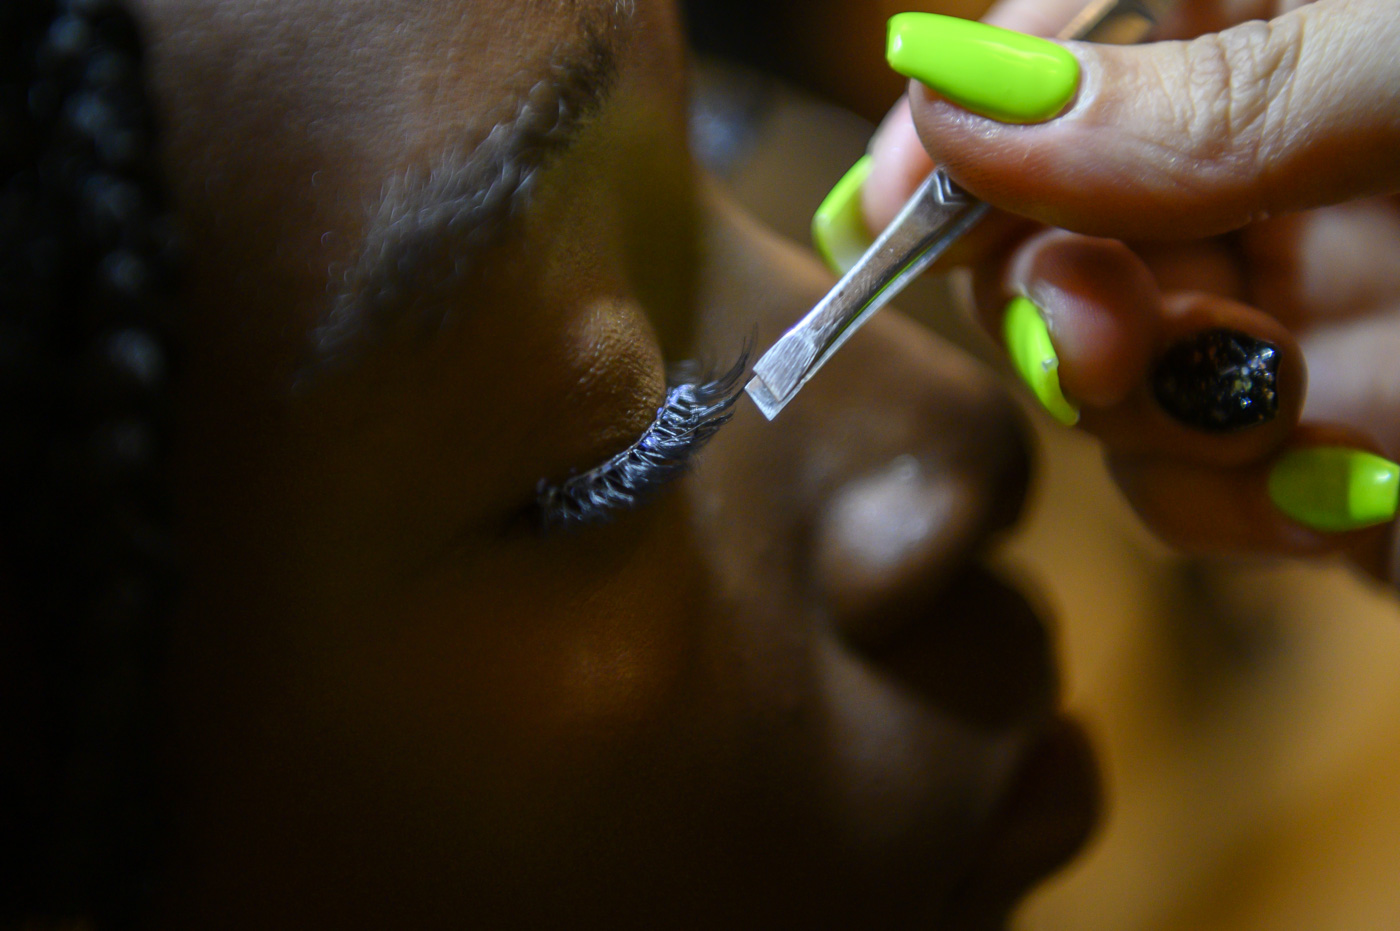 A stylist applies eyelashes to a model.